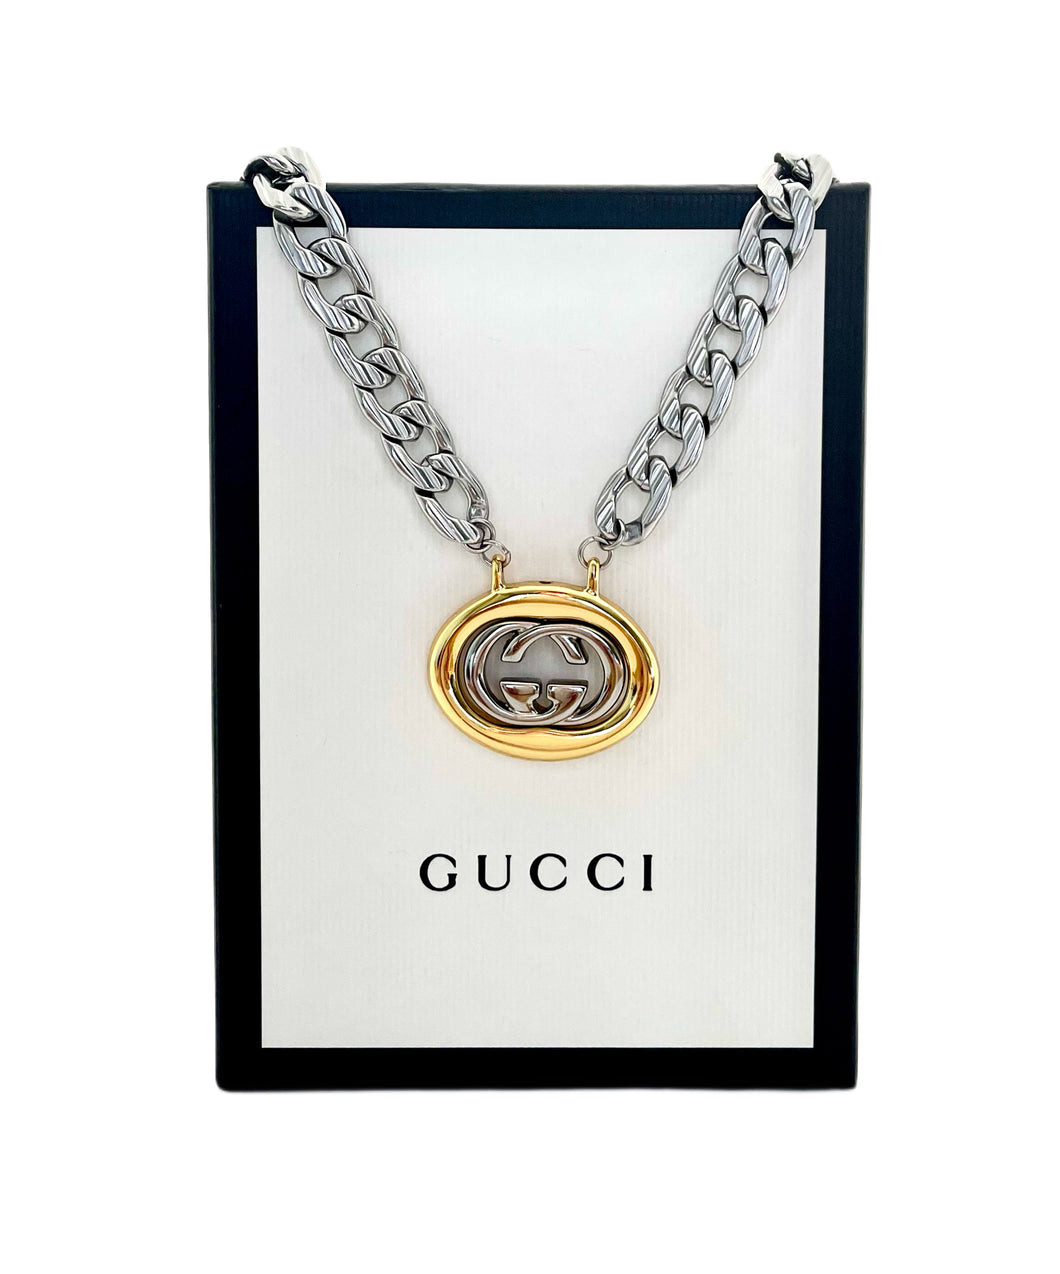 Repurposed Mixed Metals Vintage Gucci Charm Necklace